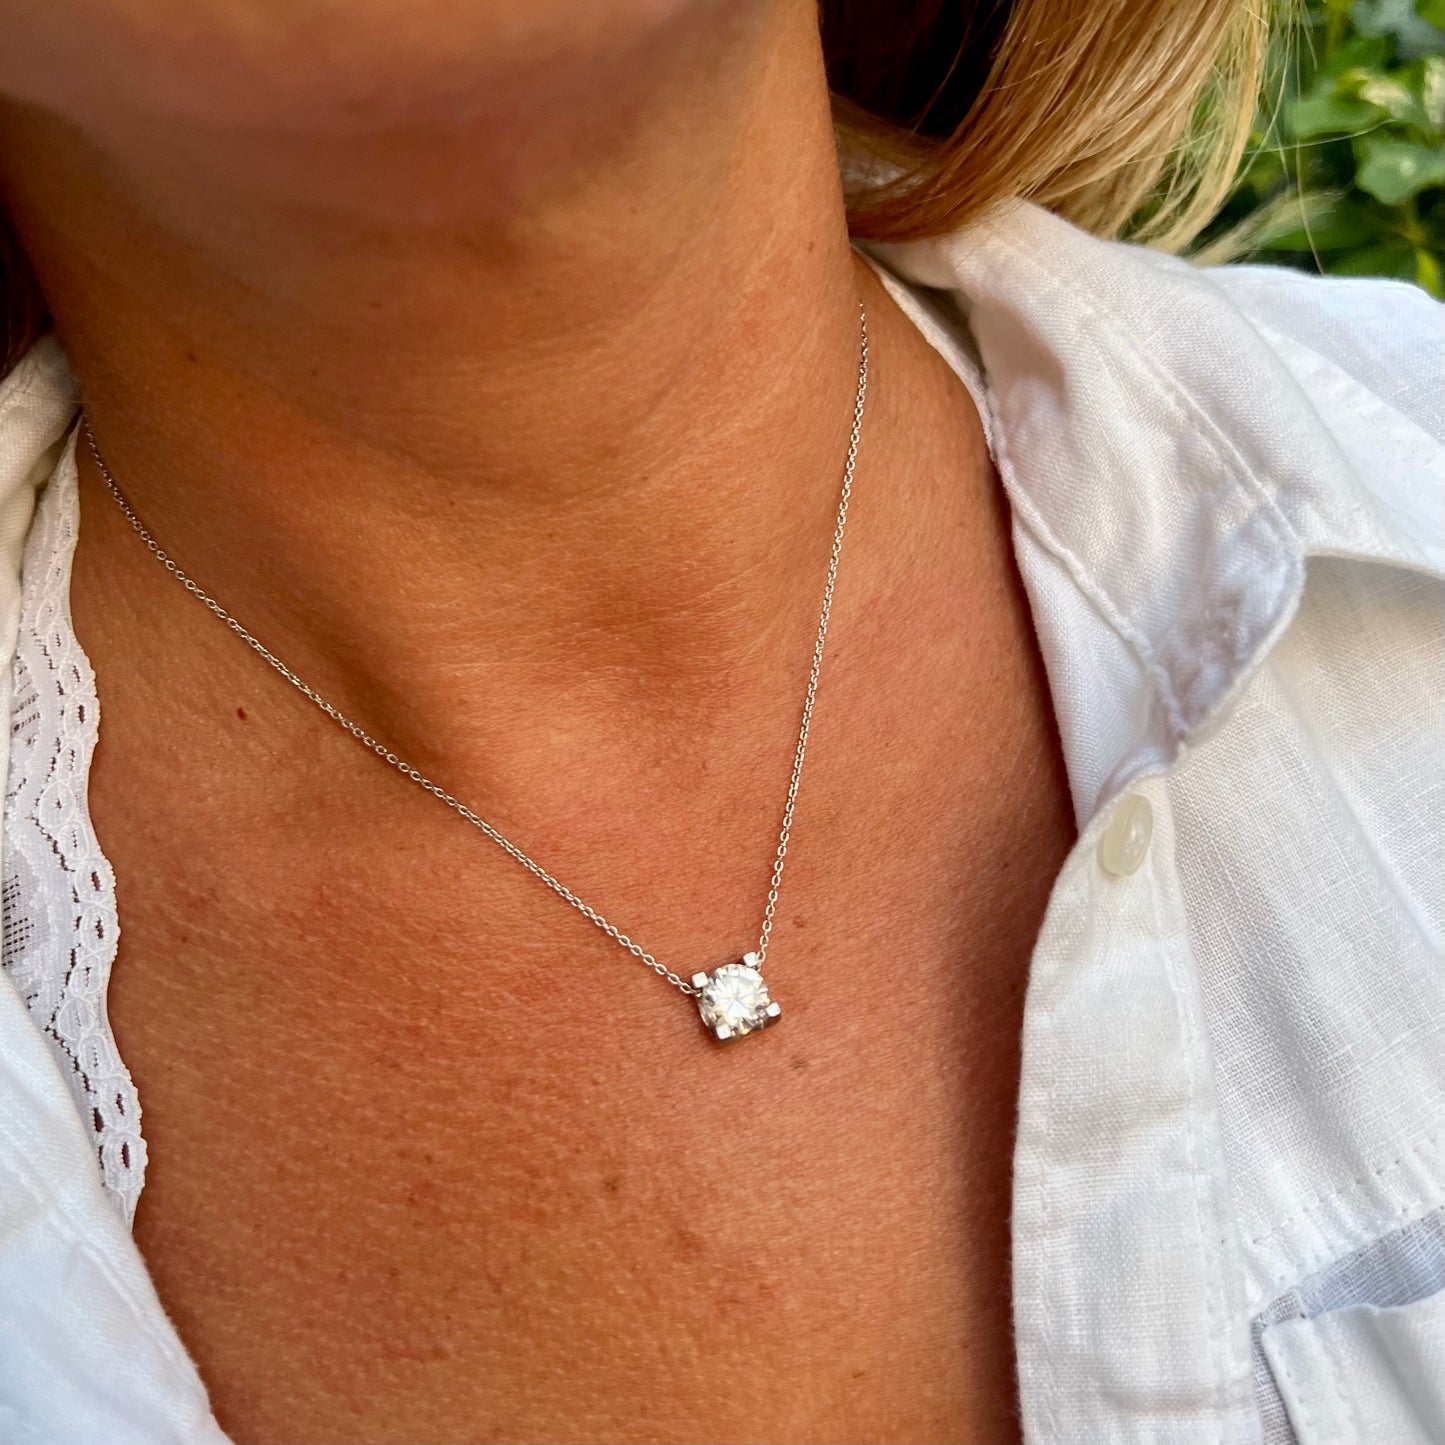 Light Spot Necklace in Sterling Silver 925